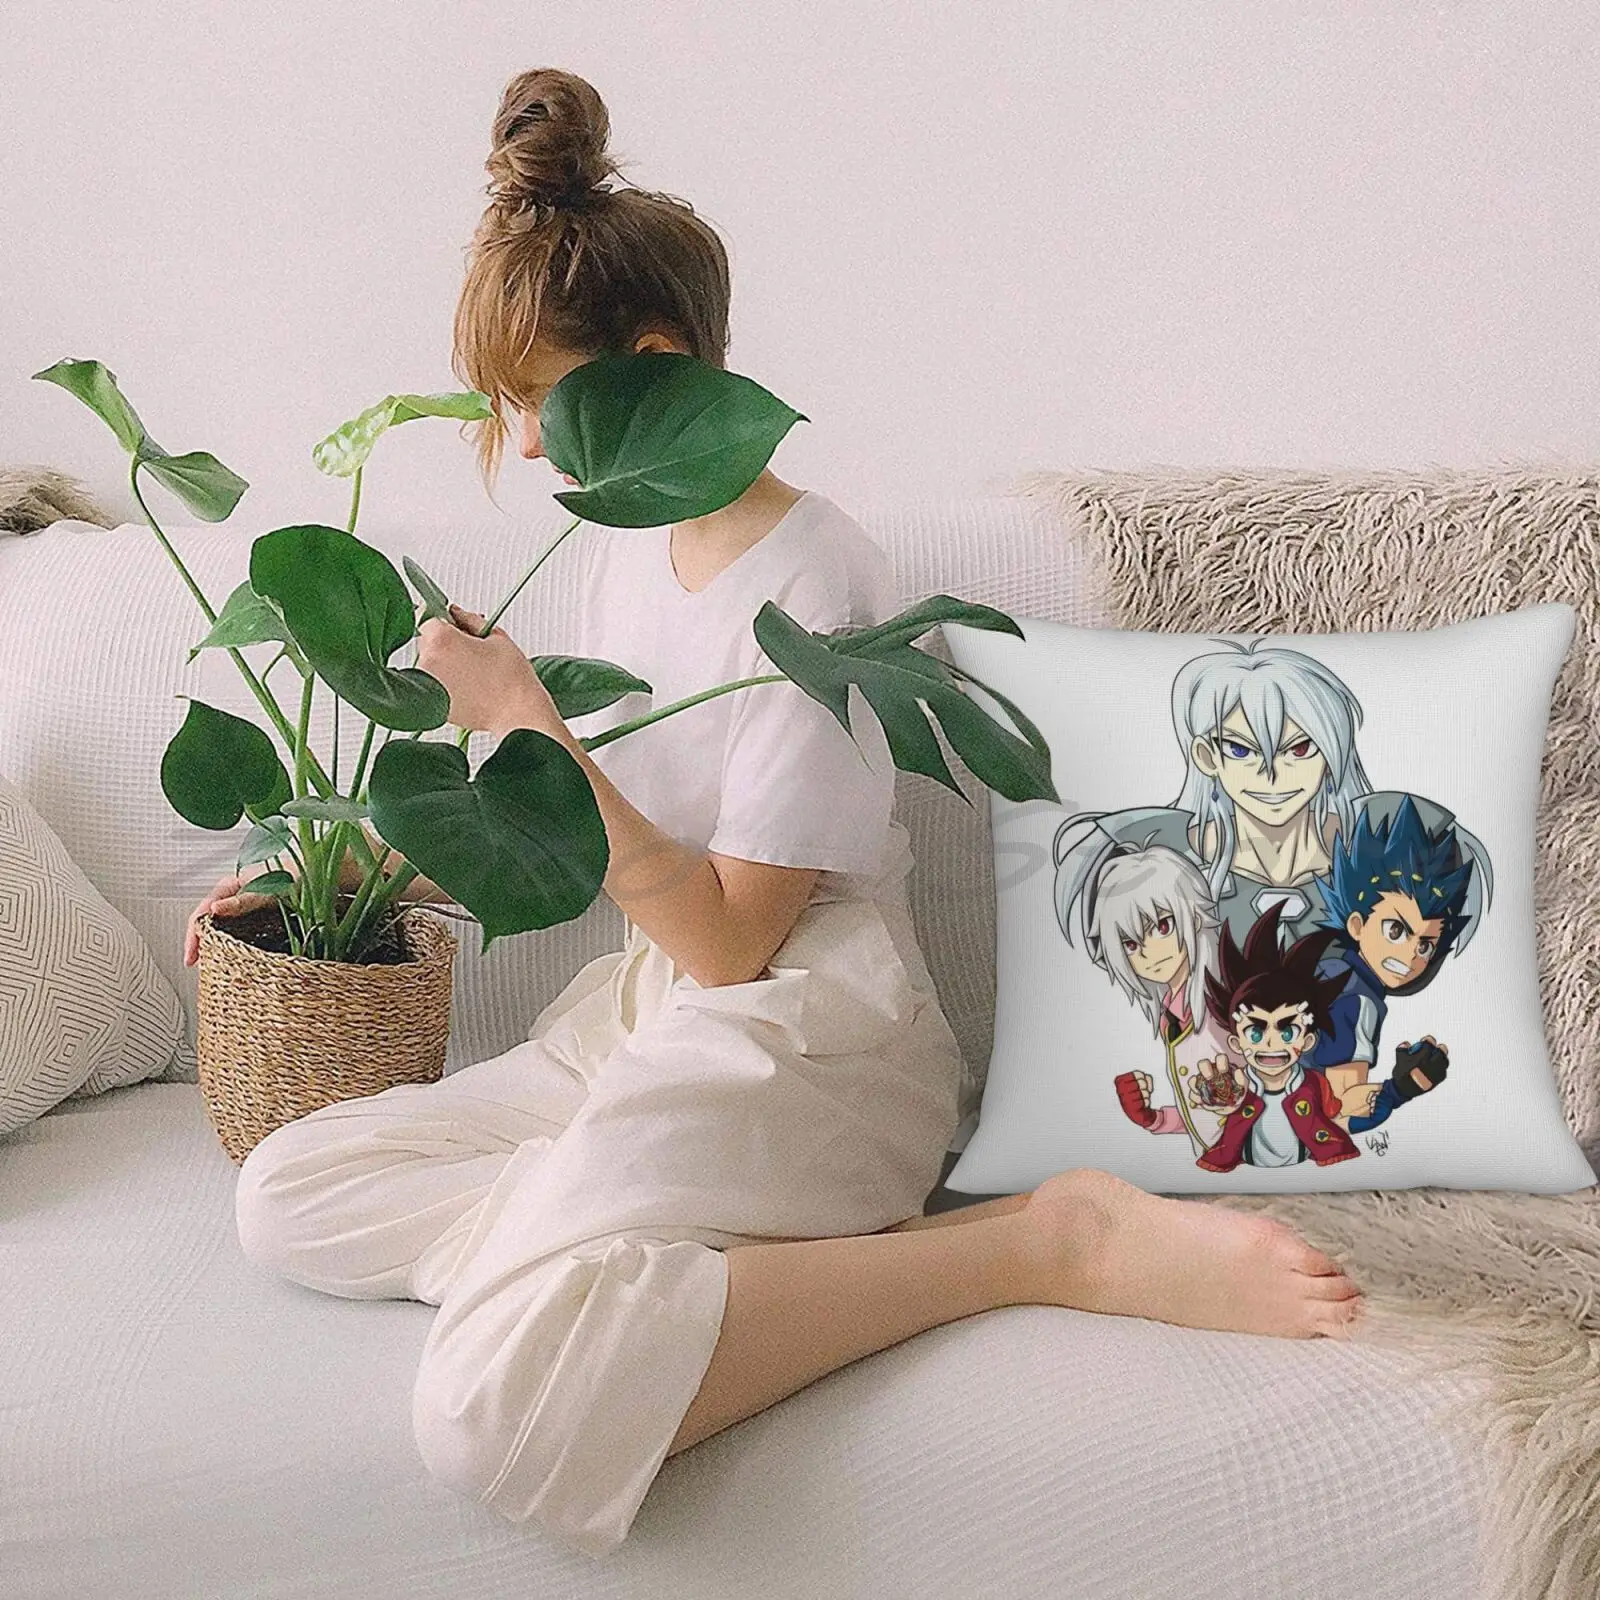 Shu Kurenai No Background From Beyblade Burst Throw Pillow Drop And Blanket  Pillow For Sleeping Cover Nordic Style Home Decor - AliExpress